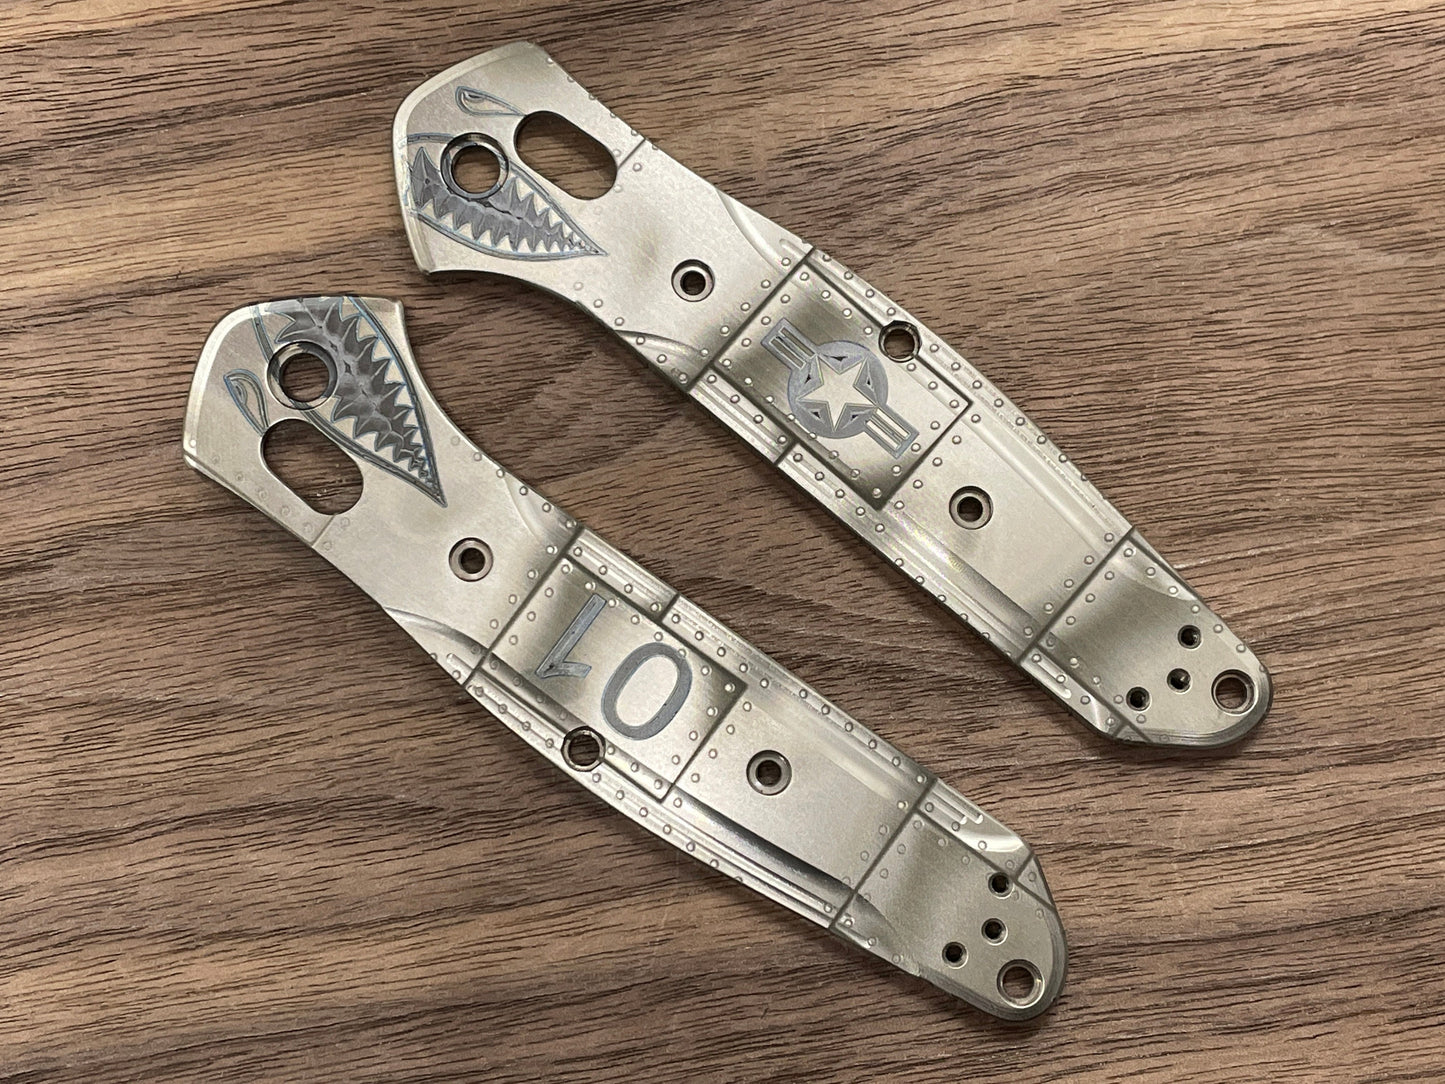 P40 RIVETED engraved Titanium Scales for Benchmade 940 Osborne